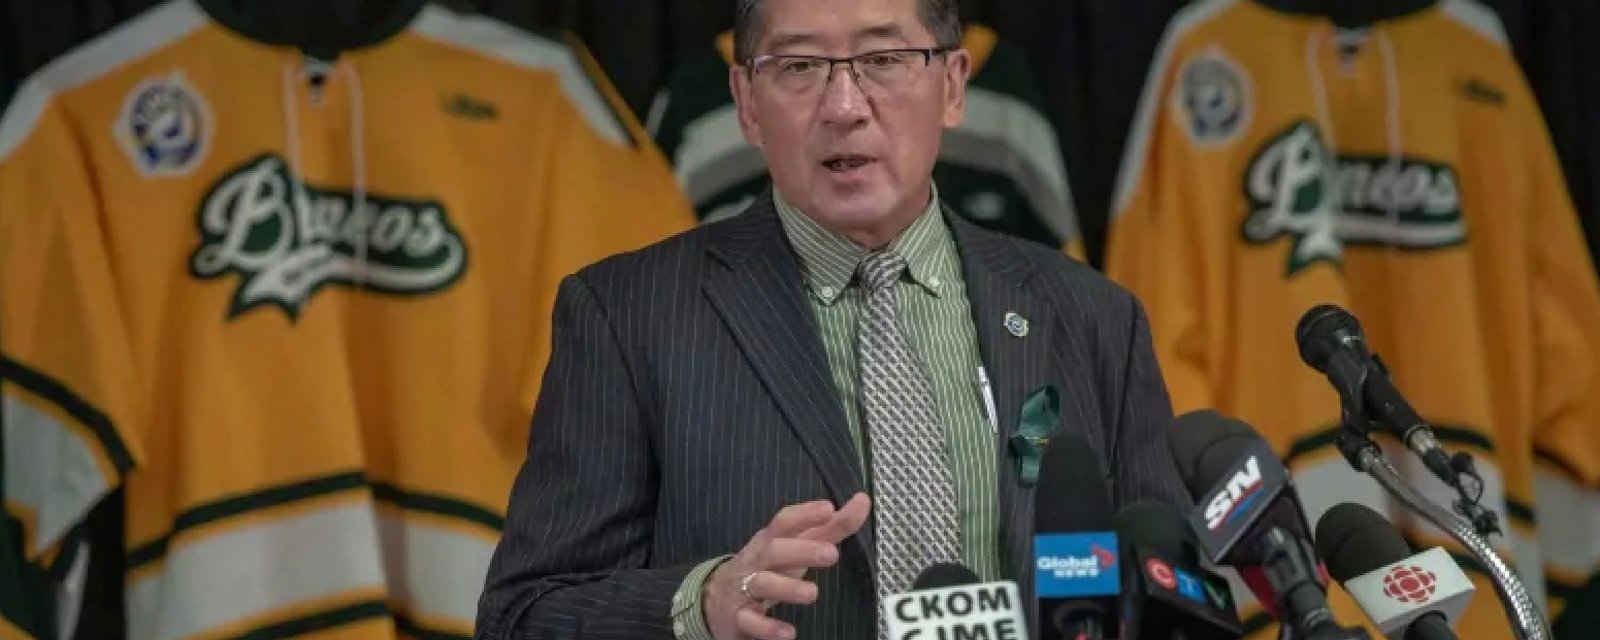 Scandal in Humboldt over 'disgusting and opportunistic' management of over $2 million.